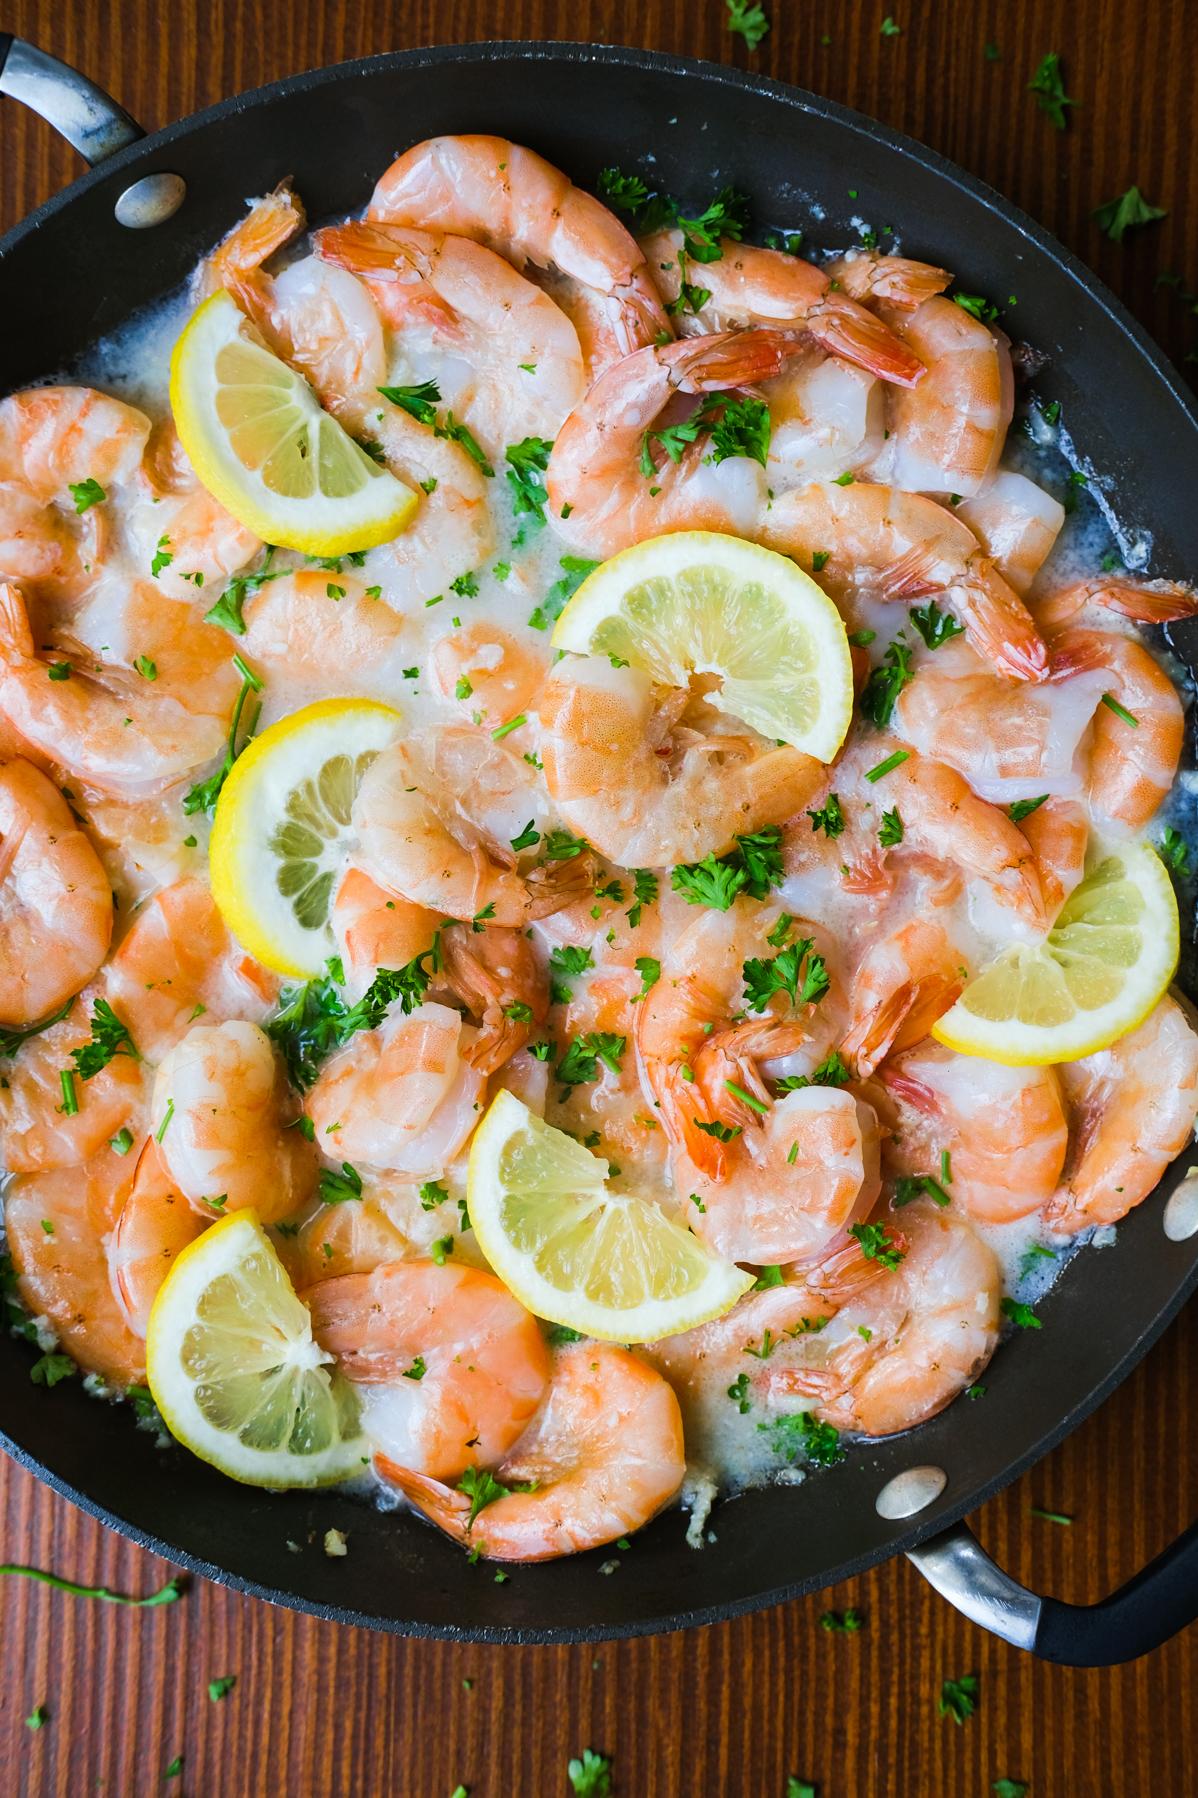  Enjoy the delicate sweetness of shrimp beautifully accentuated by the richness of the wine sauce.